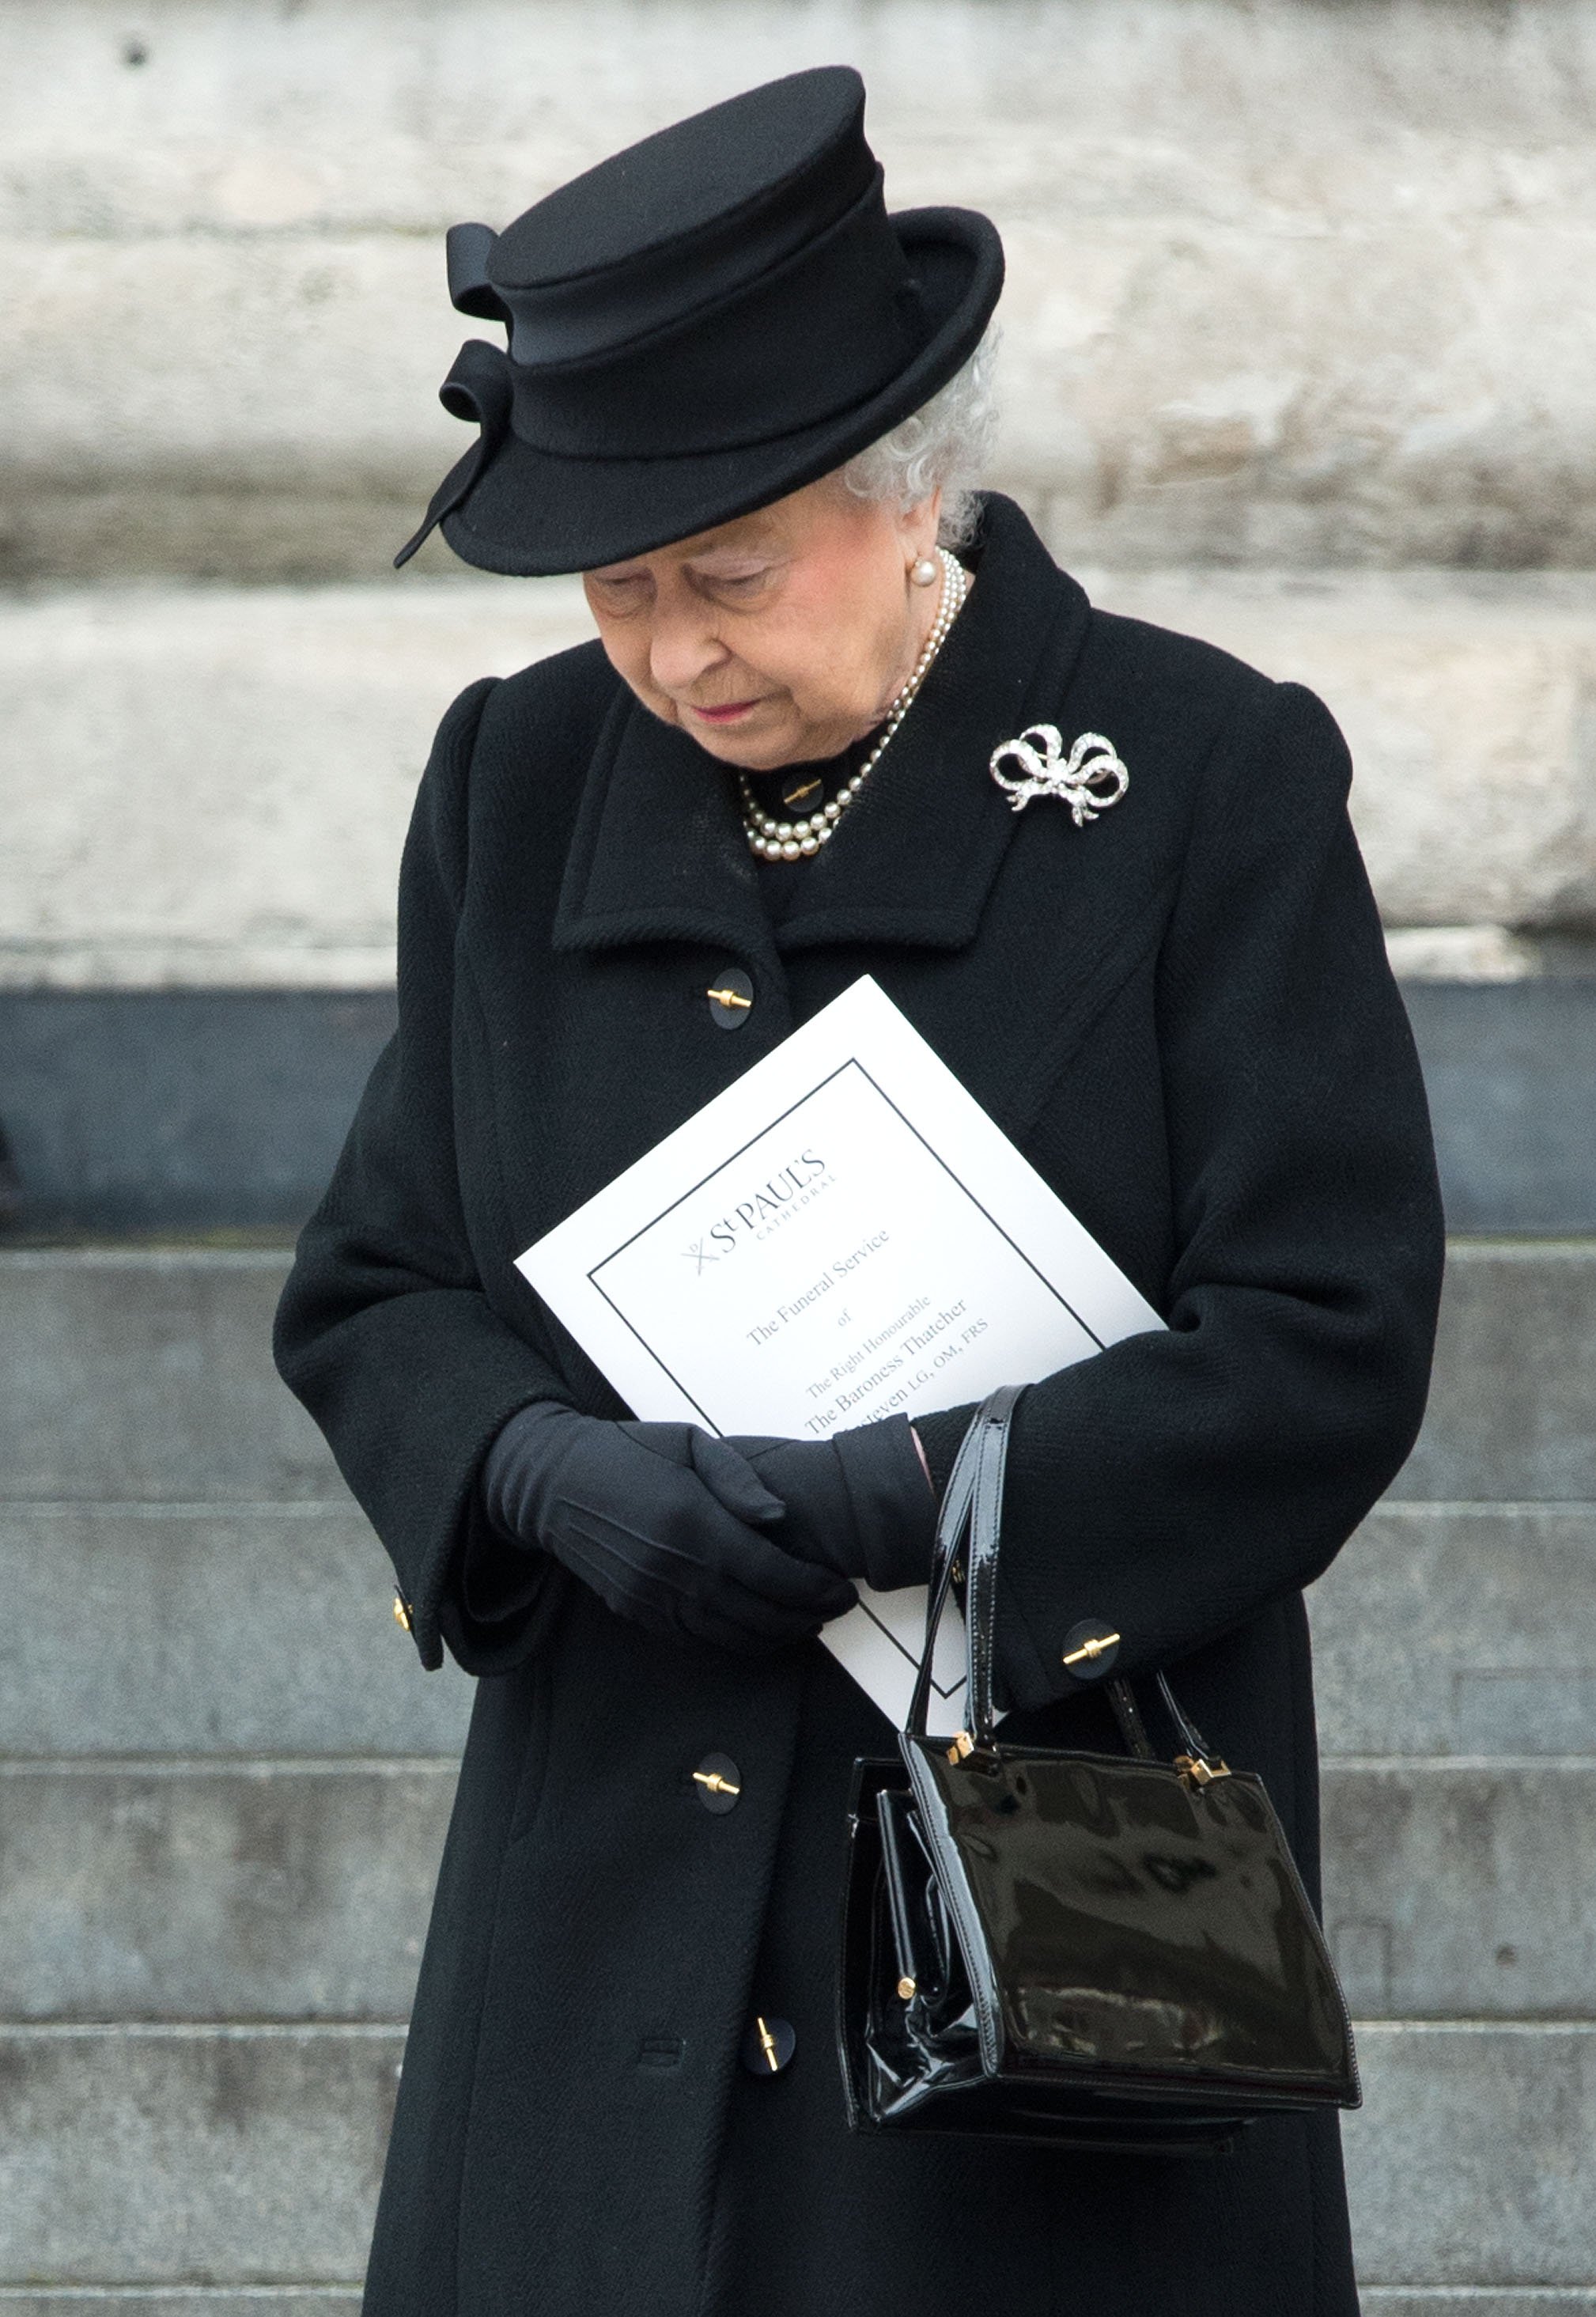 Queen Elizabeth ll attends the funeral of Margaret Thatcher at St. Paul's Cathedral on April 17, 2013 in London, England | Source: Getty Images